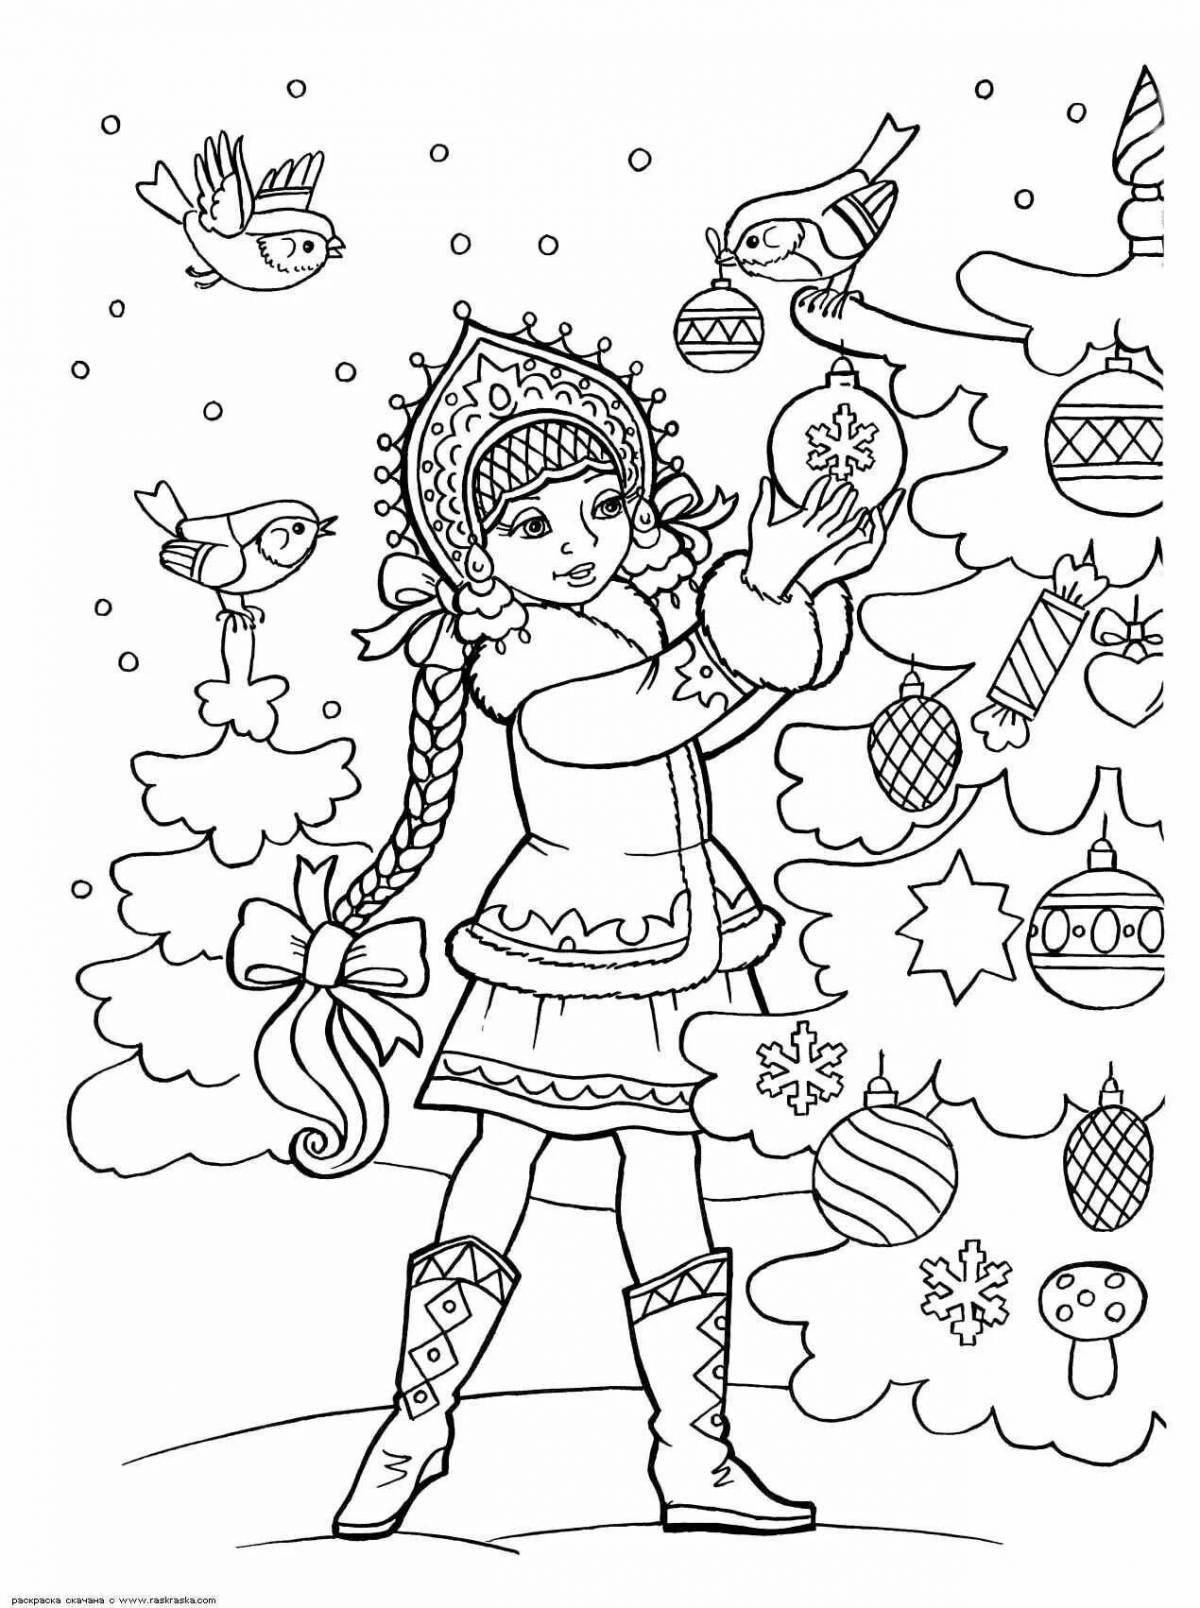 Exciting Christmas coloring book for 10 year old girls